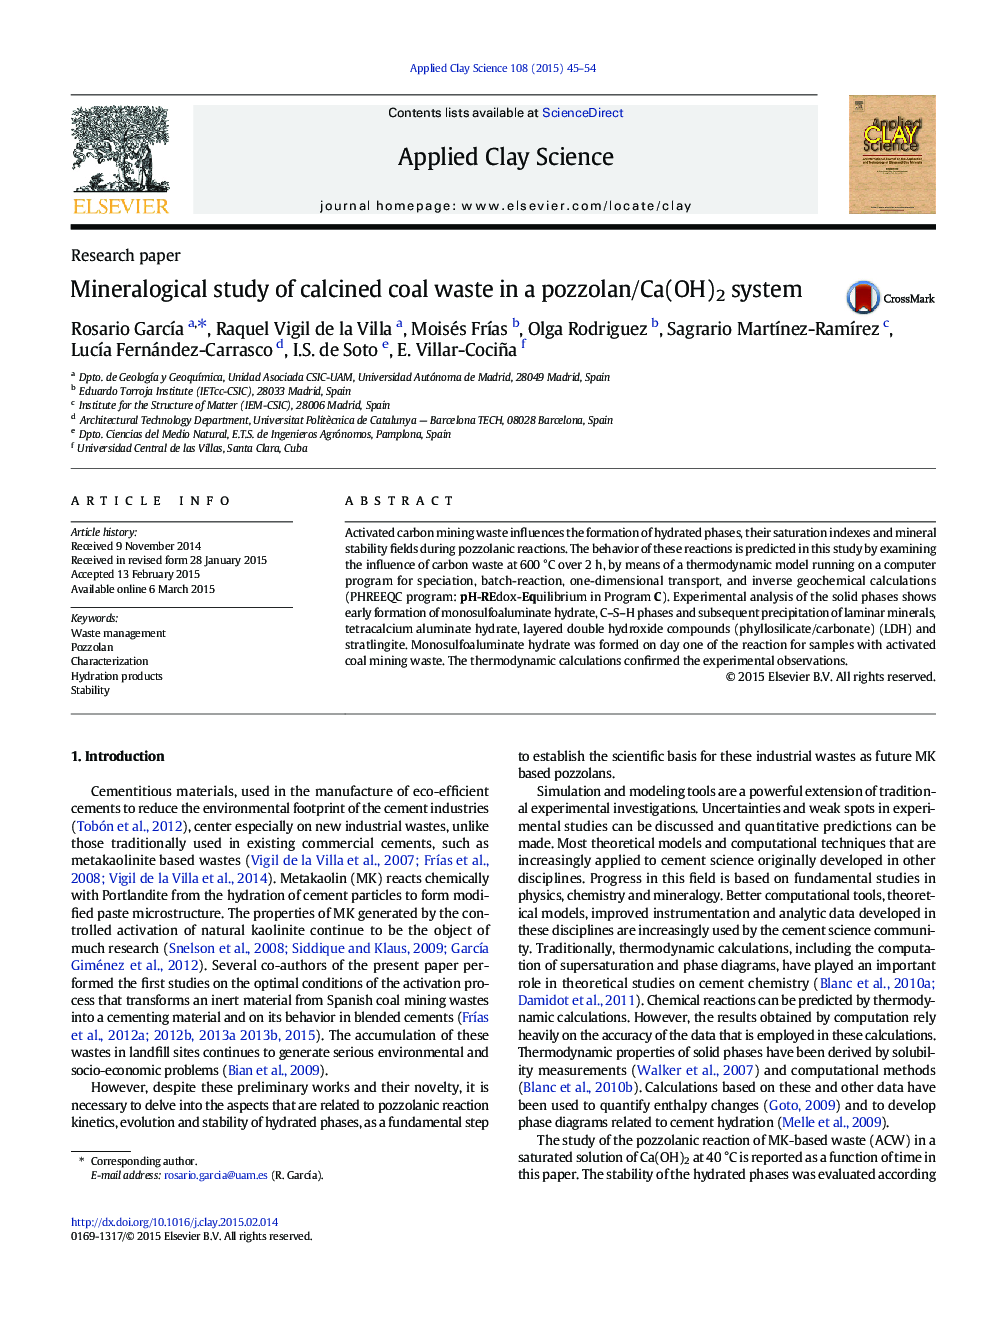 Mineralogical study of calcined coal waste in a pozzolan/Ca(OH)2 system